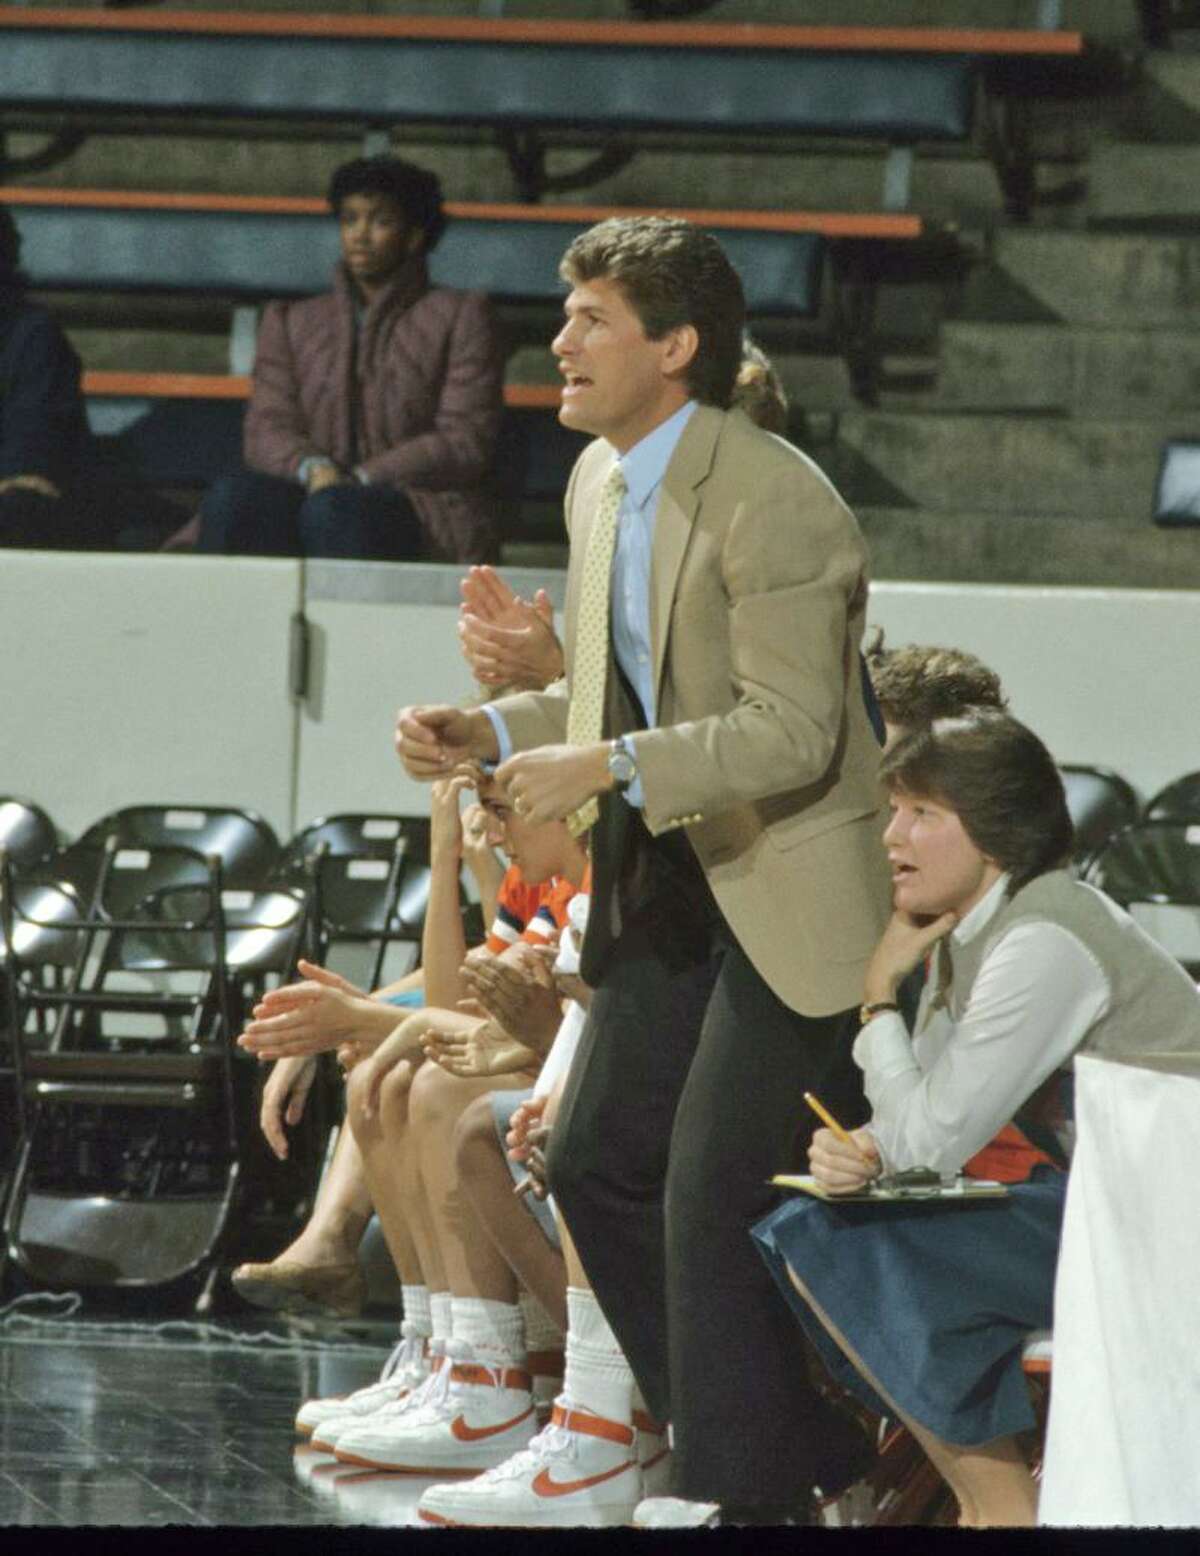 Before Geno Auriemma became the UConn women’s basketball coach in 1985, he spent four years as an assistant to Debbie Ryan at Virginia. He is shown in this undated photo during that time.